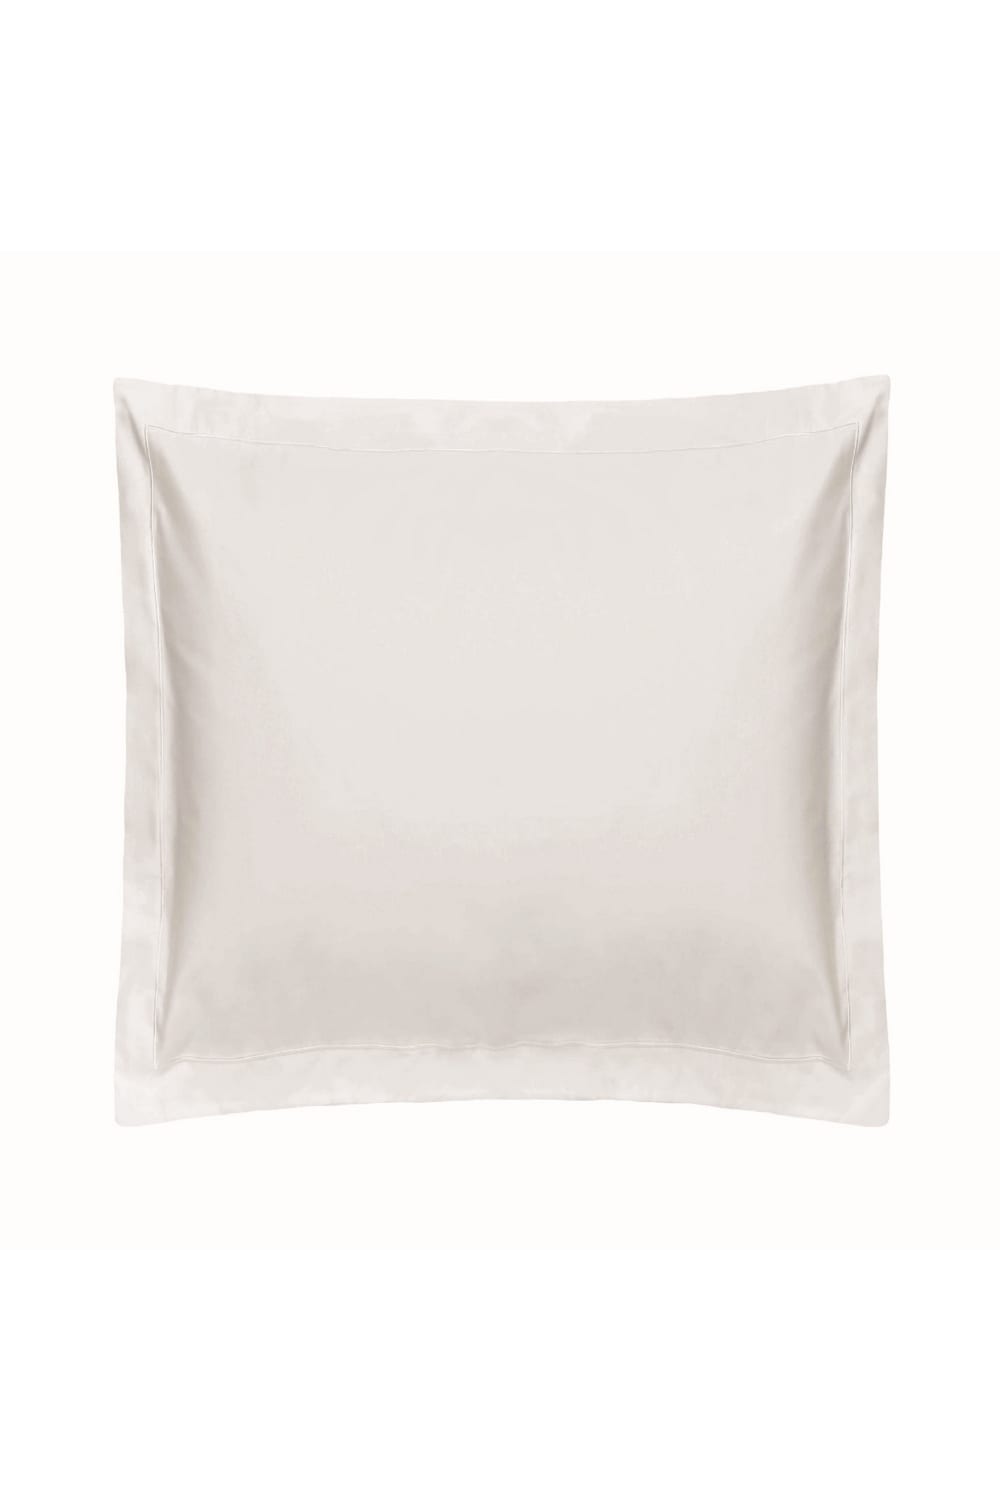 Belledorm 1000 Thread Count Cotton Sateen Continental Pillowcase (White) (One Size)